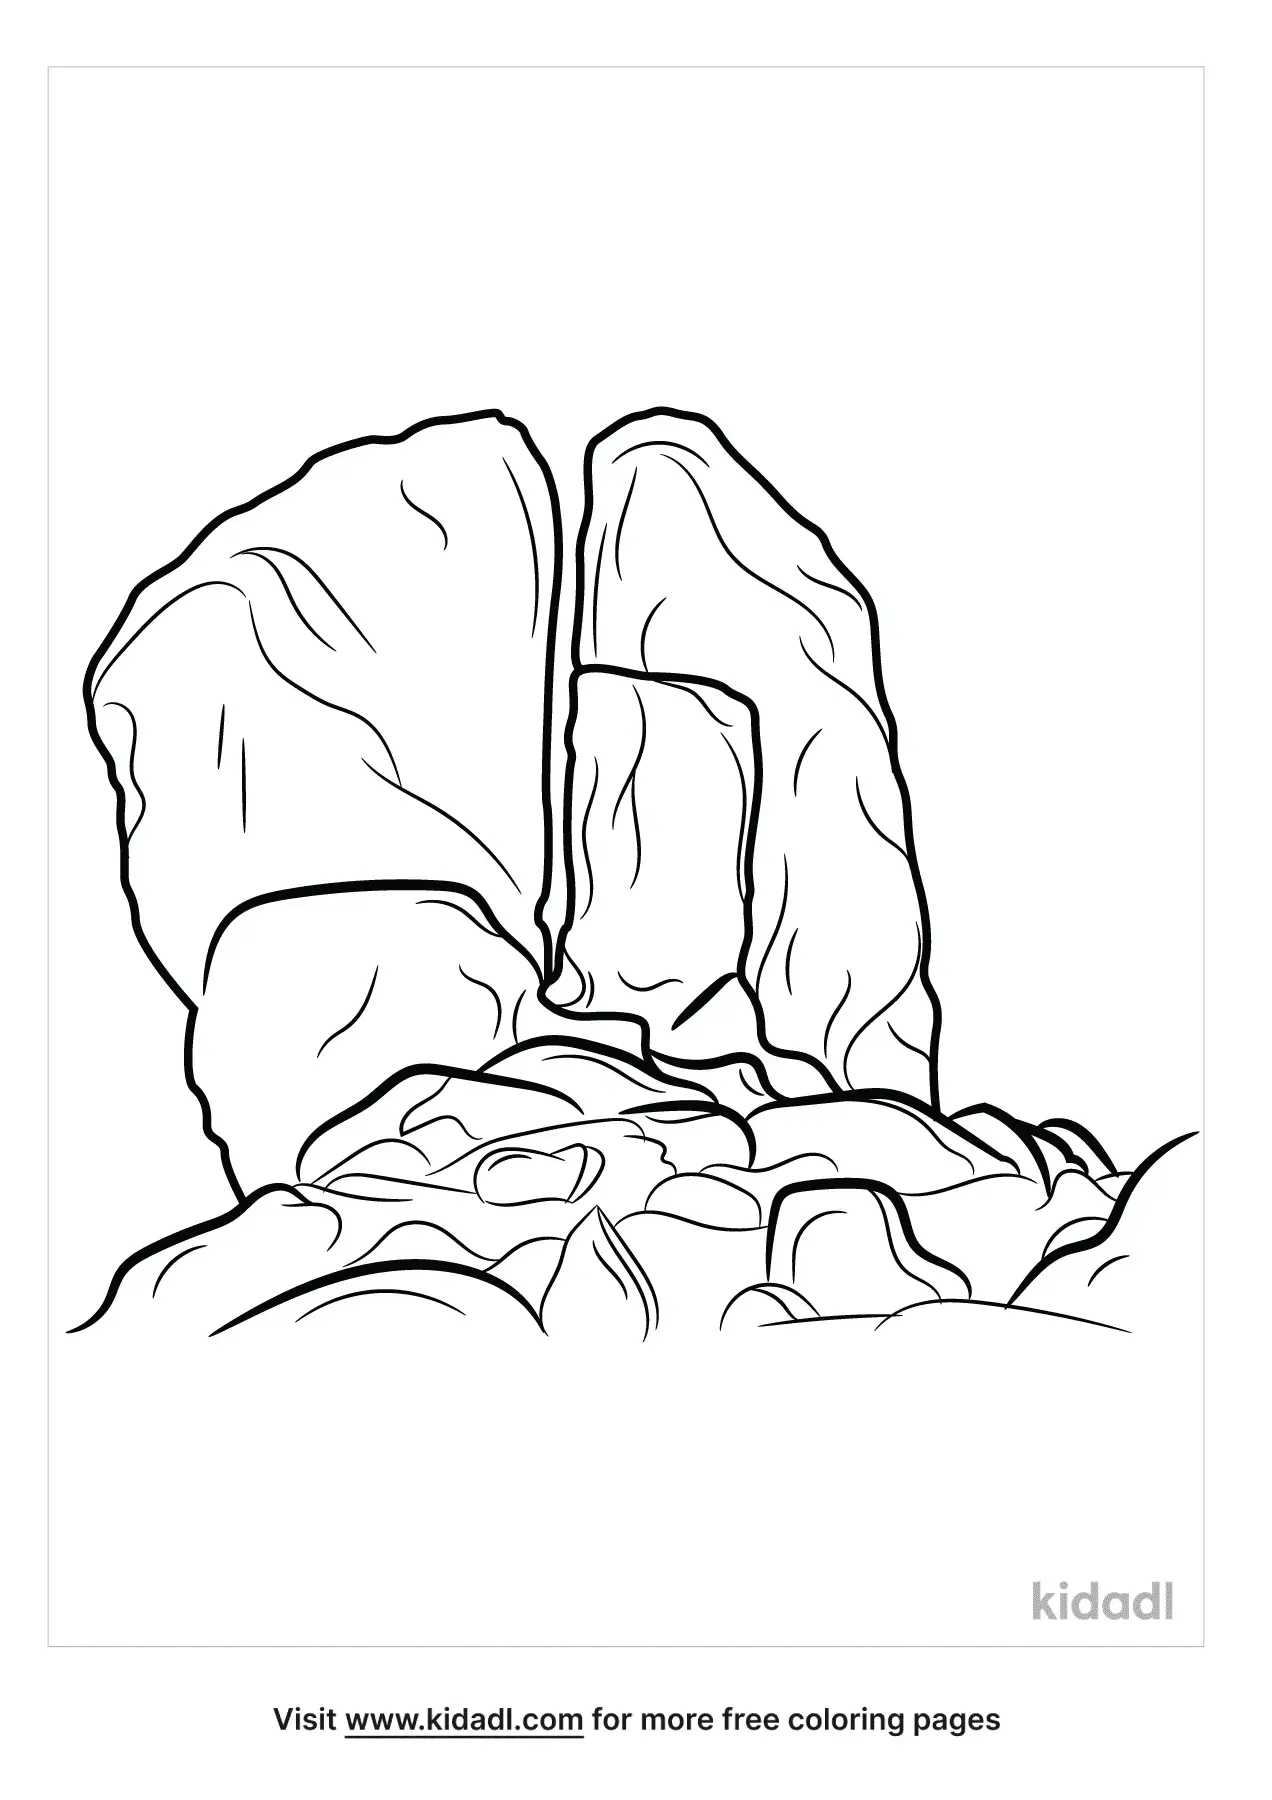 Free Rock Of Horeb Coloring Page | Coloring Page Printables | Kidadl